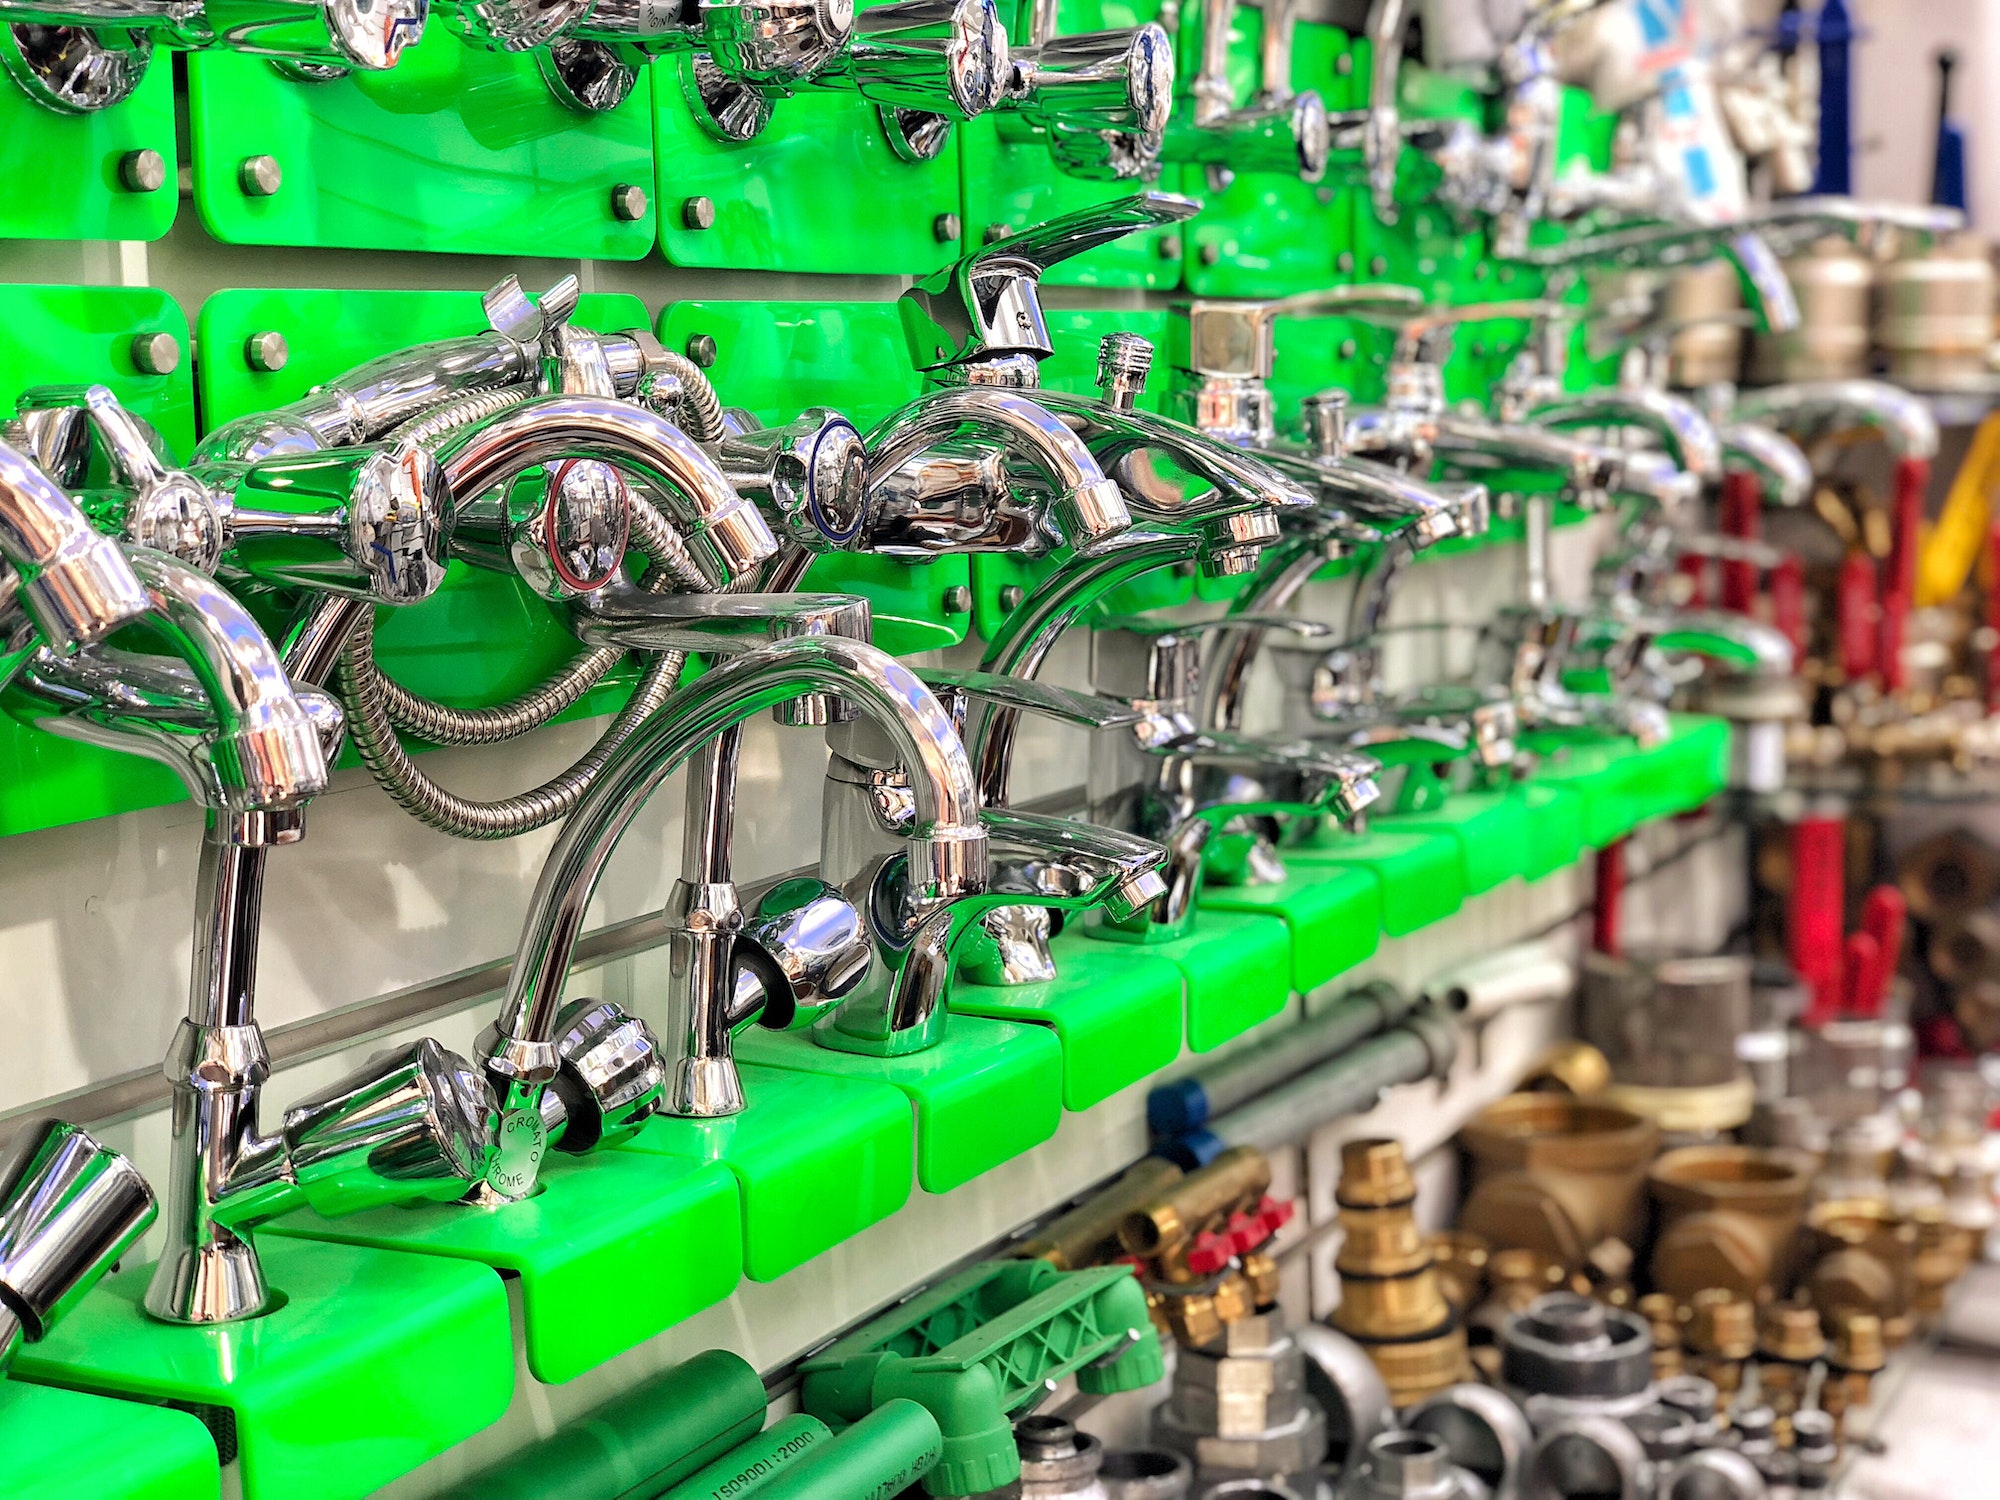 Plumbing store display of faucets